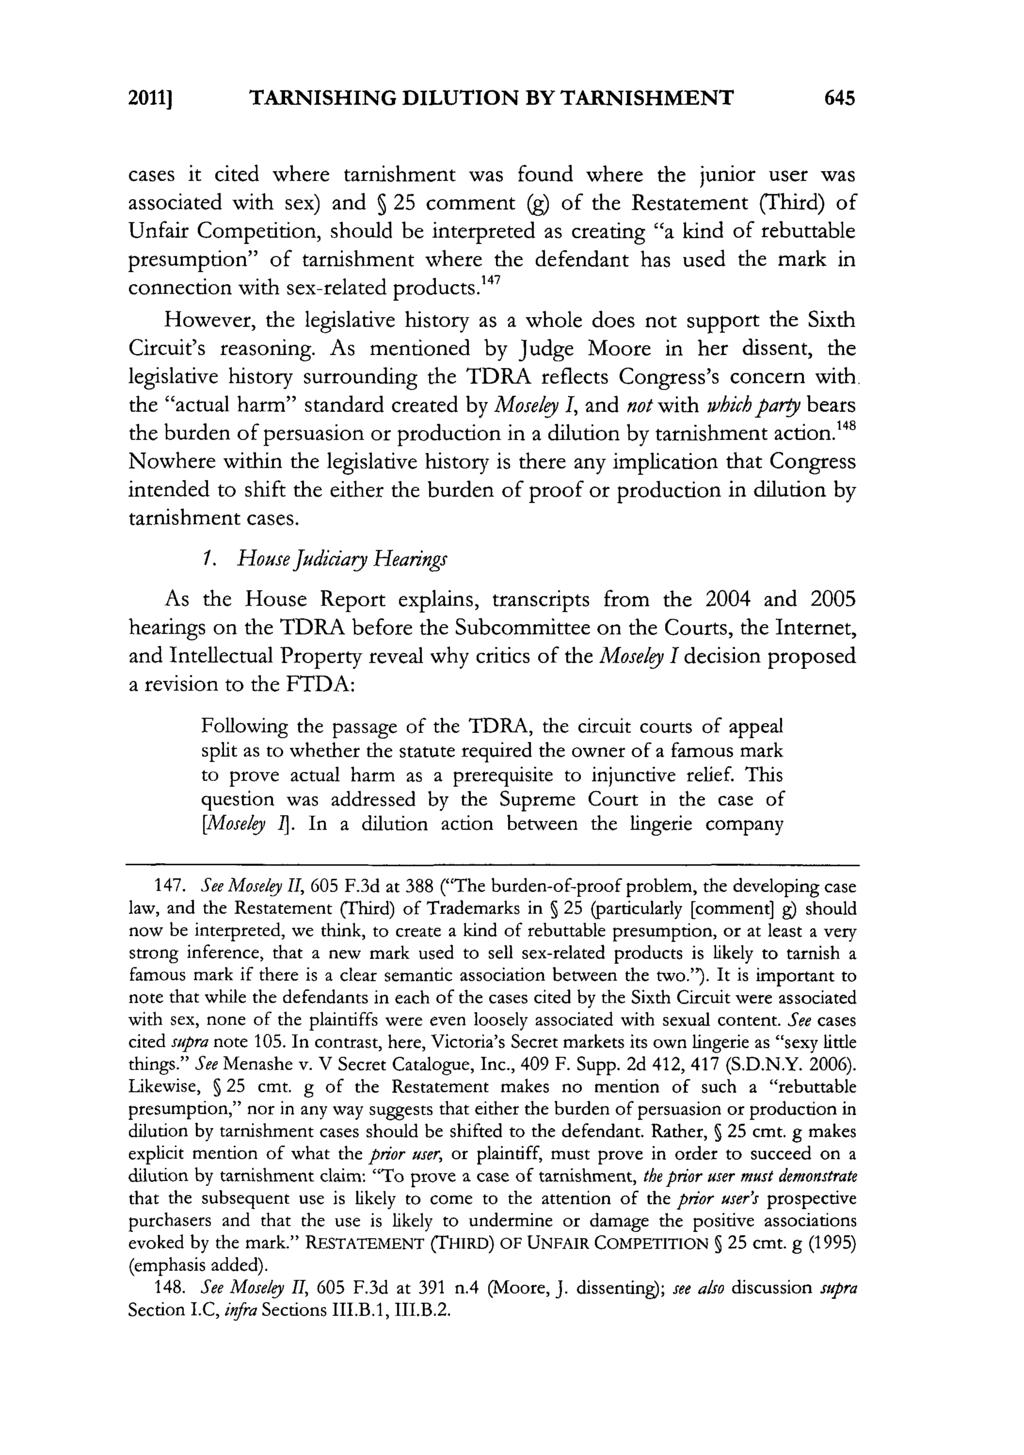 2011]1 TARNISHING DILUTION BY TARNISHMENT 645 cases it cited where tarnishment was found where the junior user was associated with sex) and 25 comment (g) of the Restatement (Third) of Unfair